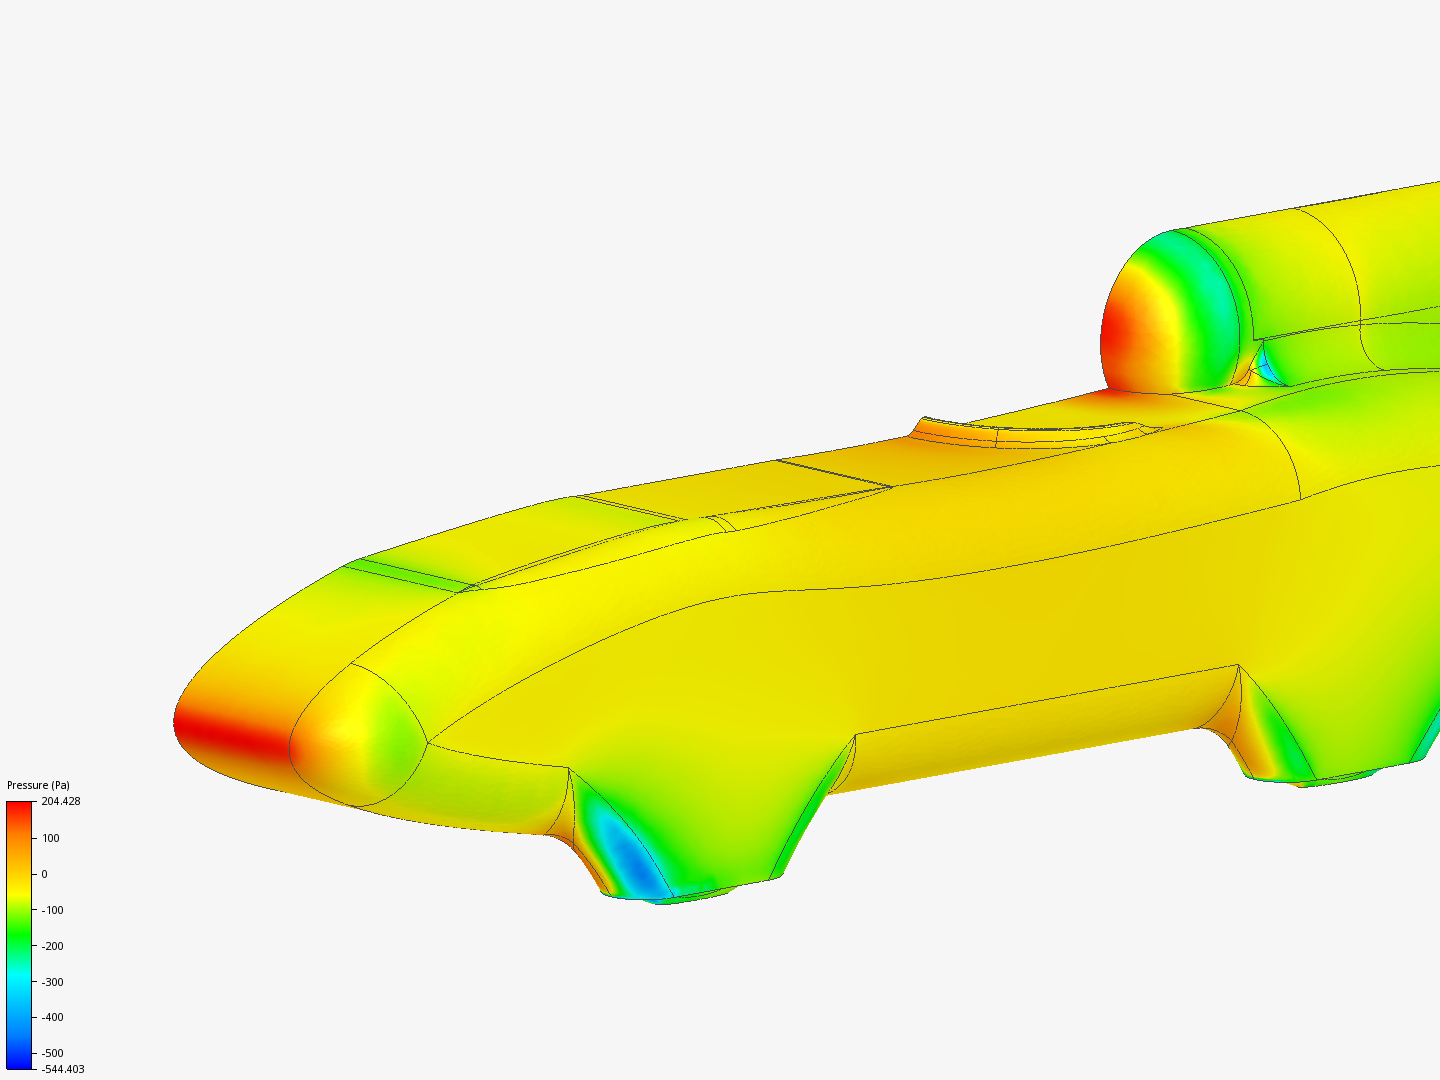 magpie_4_v1-8_cfd_1 image